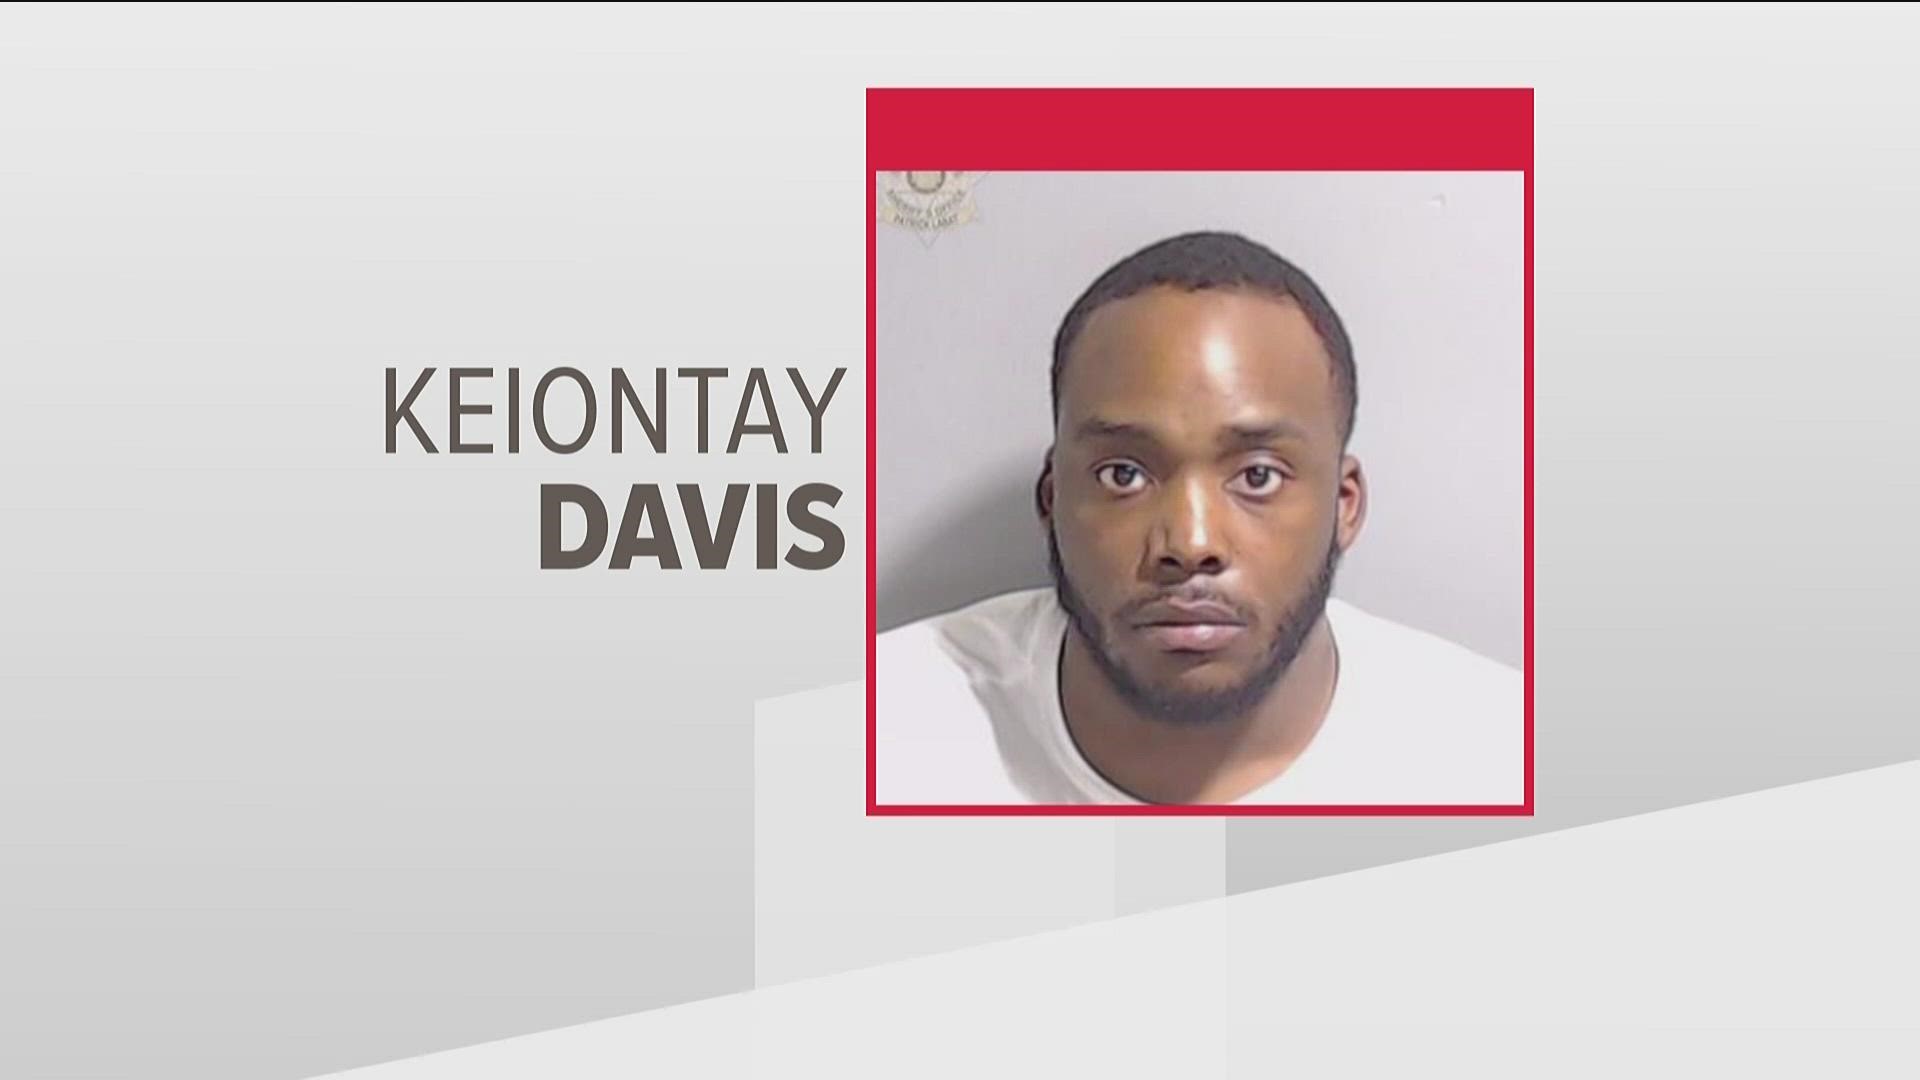 Keiontay Davis was arrested for aggravated assault and murder, according to Atlanta Police.